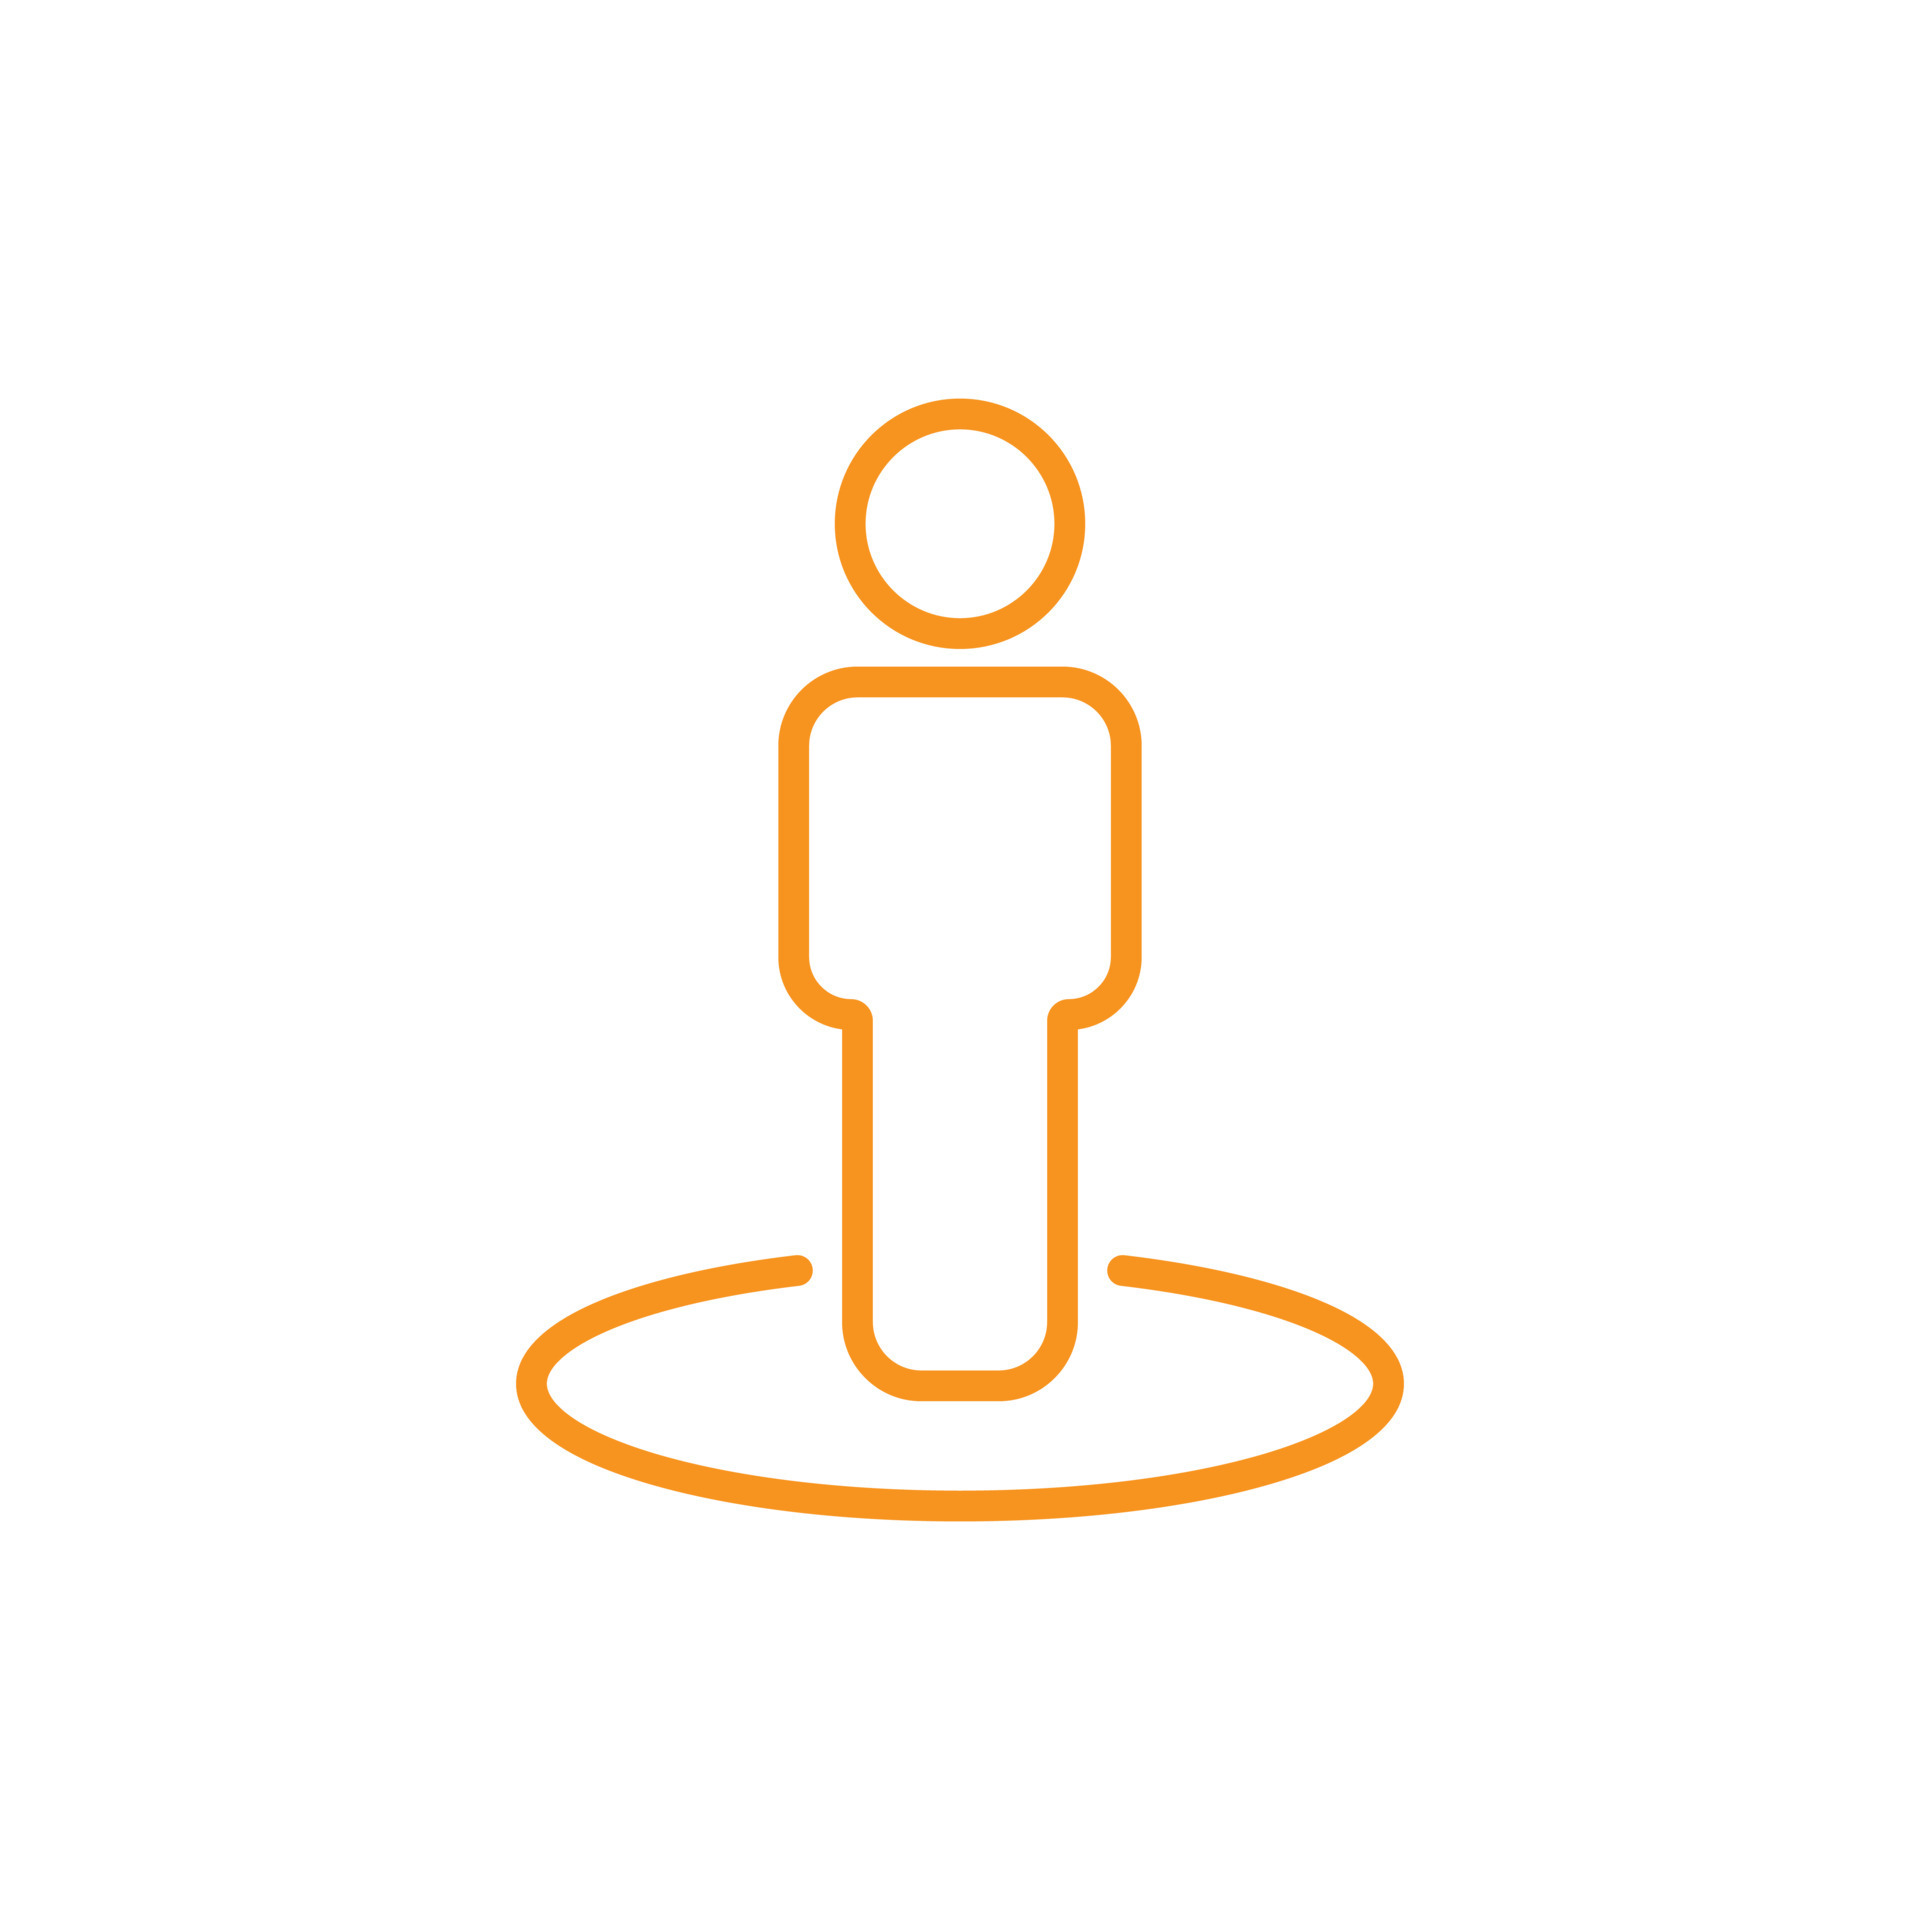 eps10-orange-street-view-or-person-in-circle-line-icon-or-logo-isolated-on-white-background-human-location-symbol-in-a-simple-flat-trendy-modern-style-for-your-website-design-and-mobile-app-v.jpg